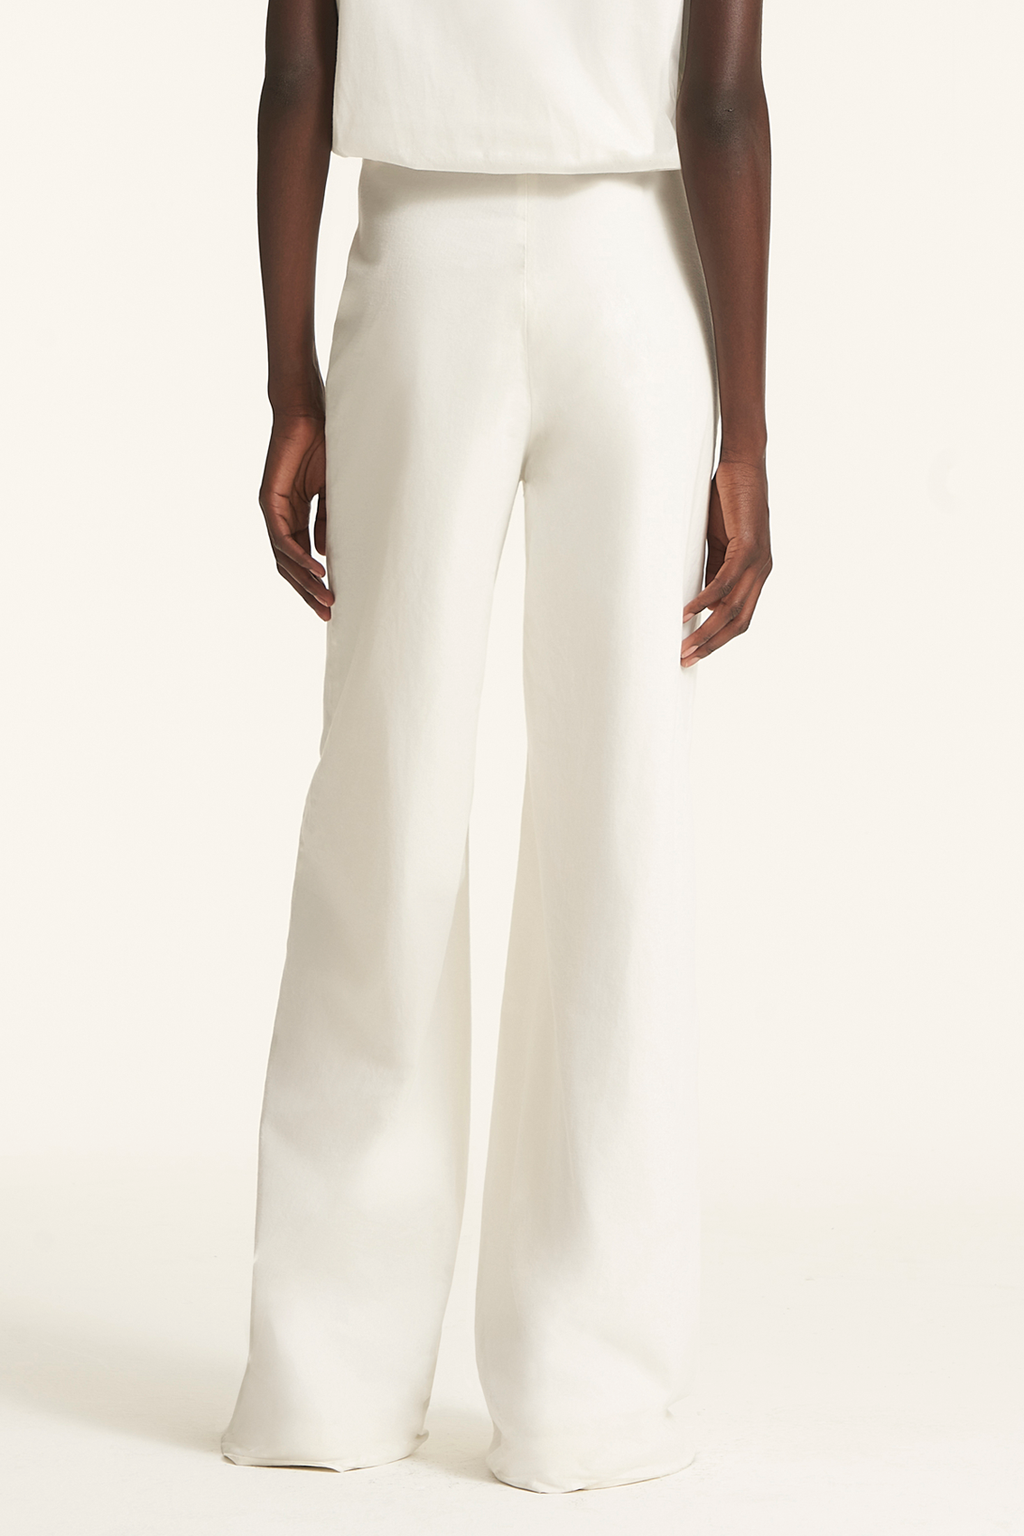 Low Rise Tie Front White Bell Slacks | Trousers | Ports1961